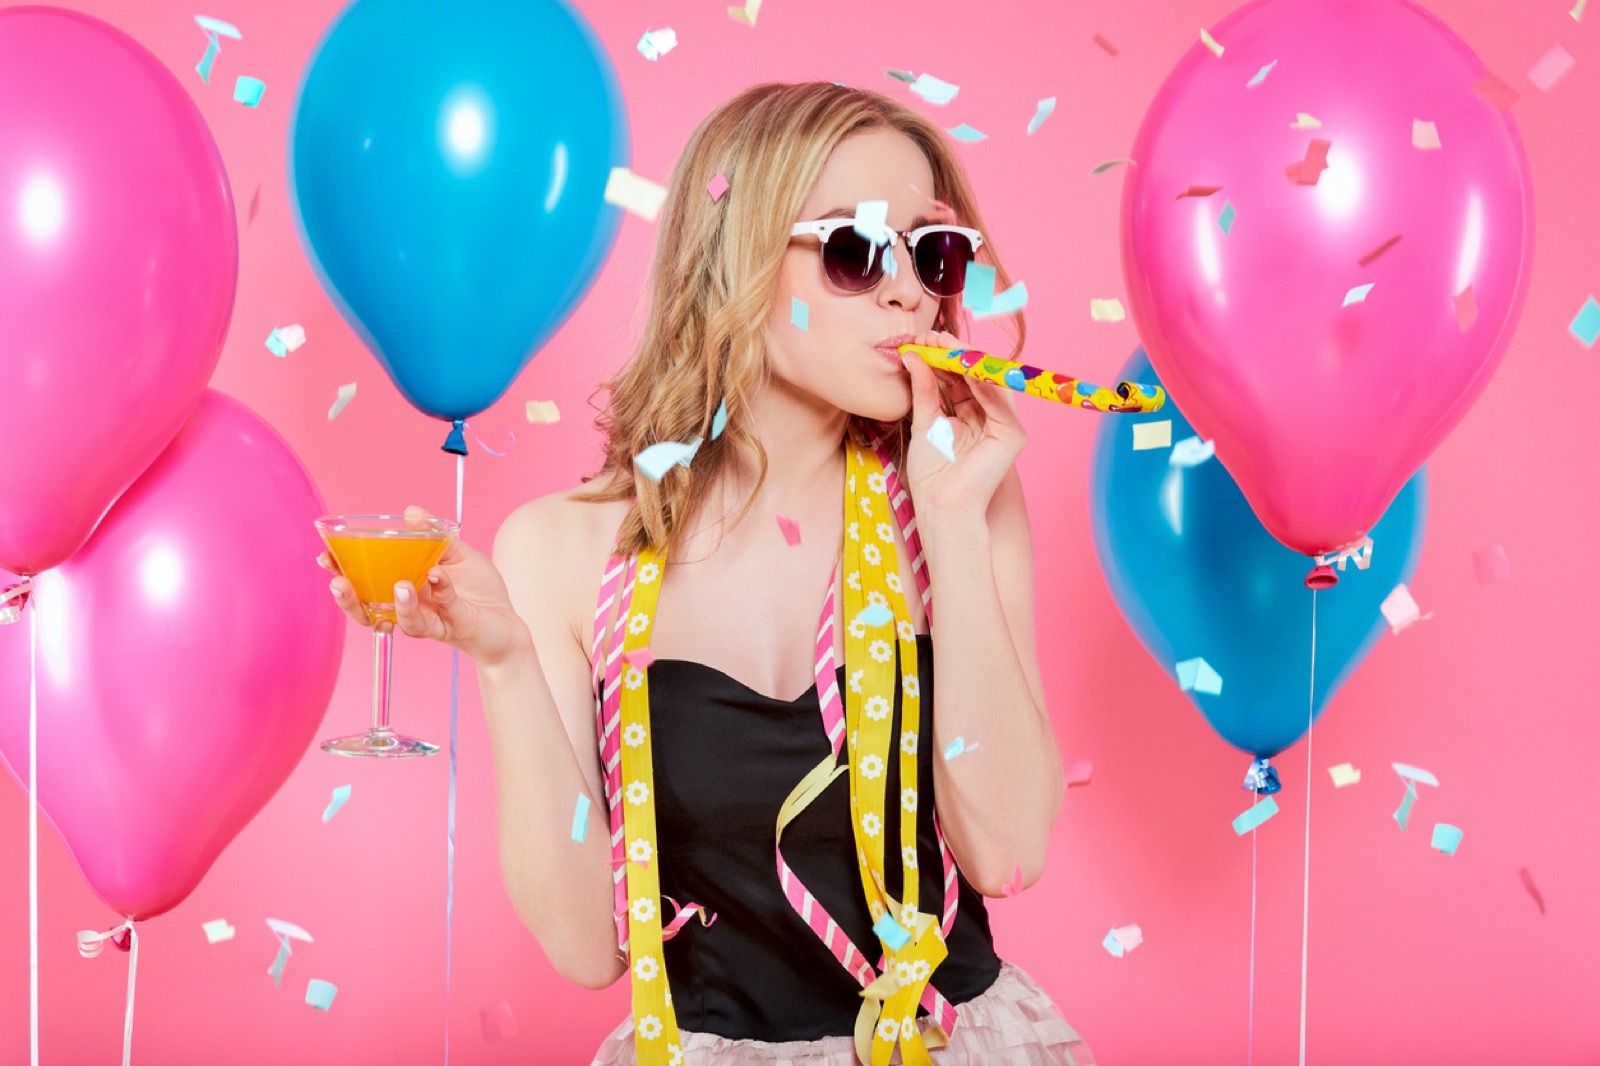 Are You More of an Introvert or an Extrovert? Gorgeous Trendy Young Woman In Party Outfit Celebrating Birthday. Party Mood, Balloons, Noisemaker, Flying Confetti, Cocktail And Dancing Concept On Pastel Pink Background.